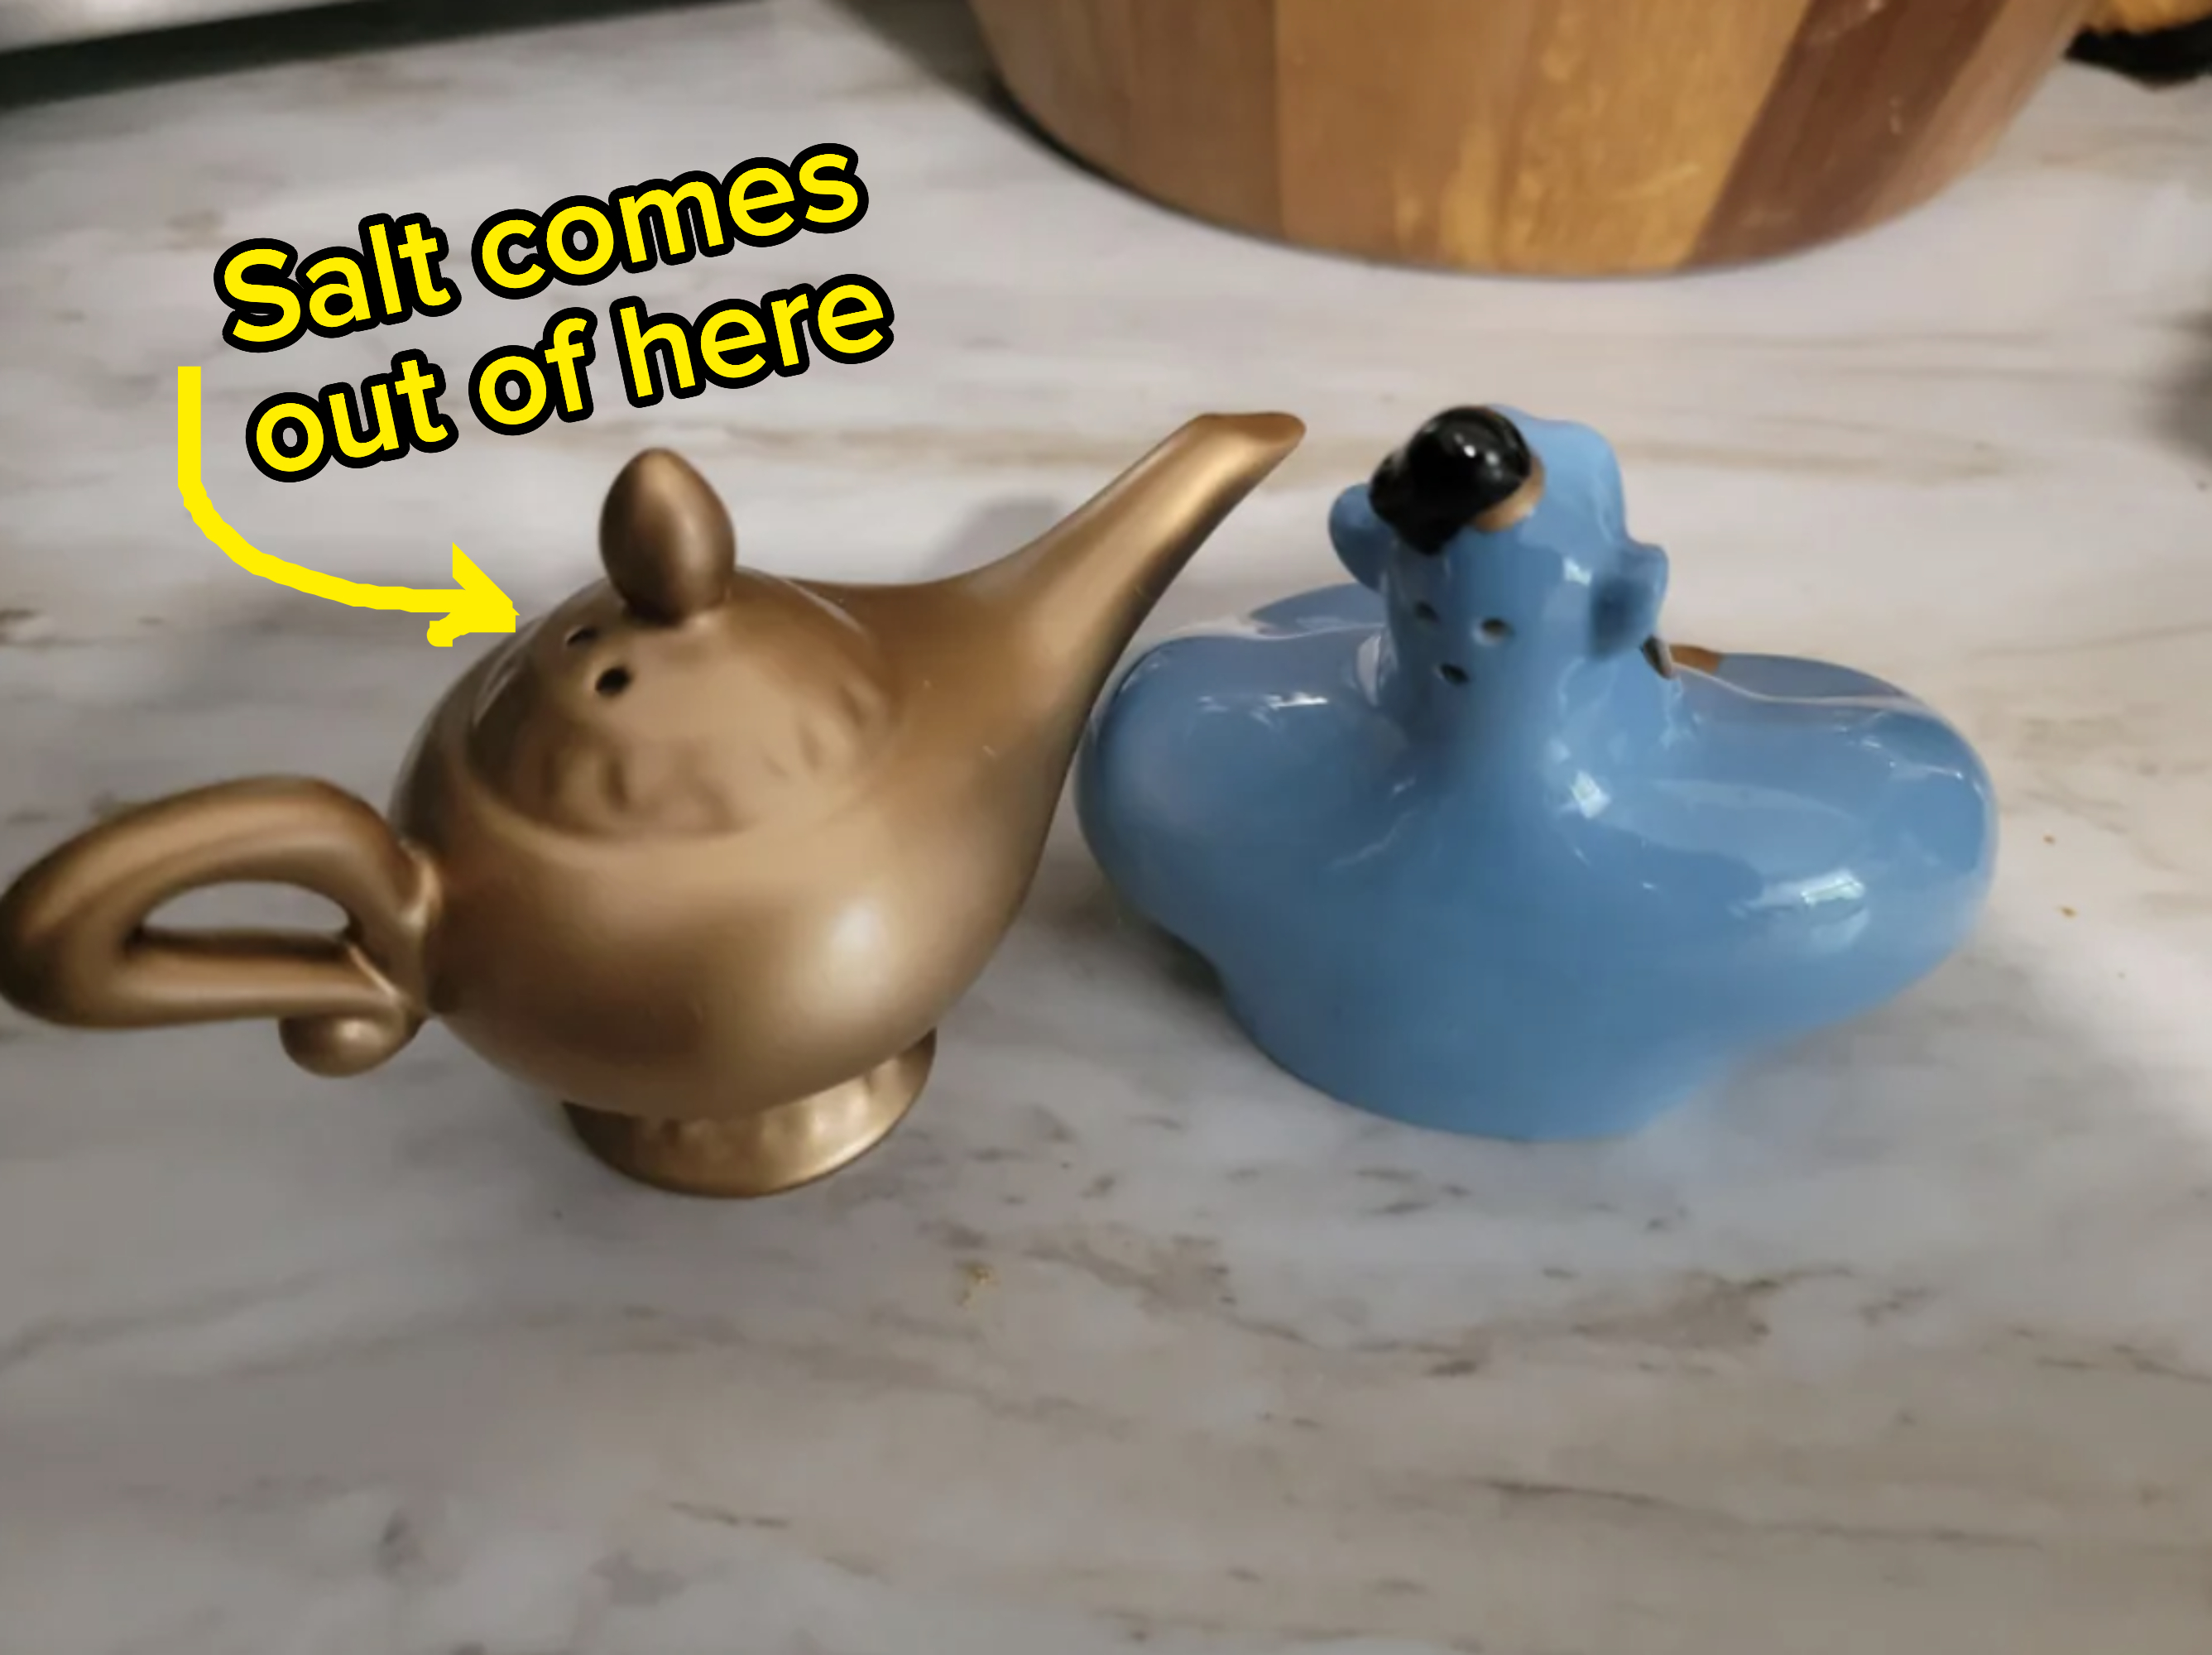 Aladdin-themed salt and pepper shakers